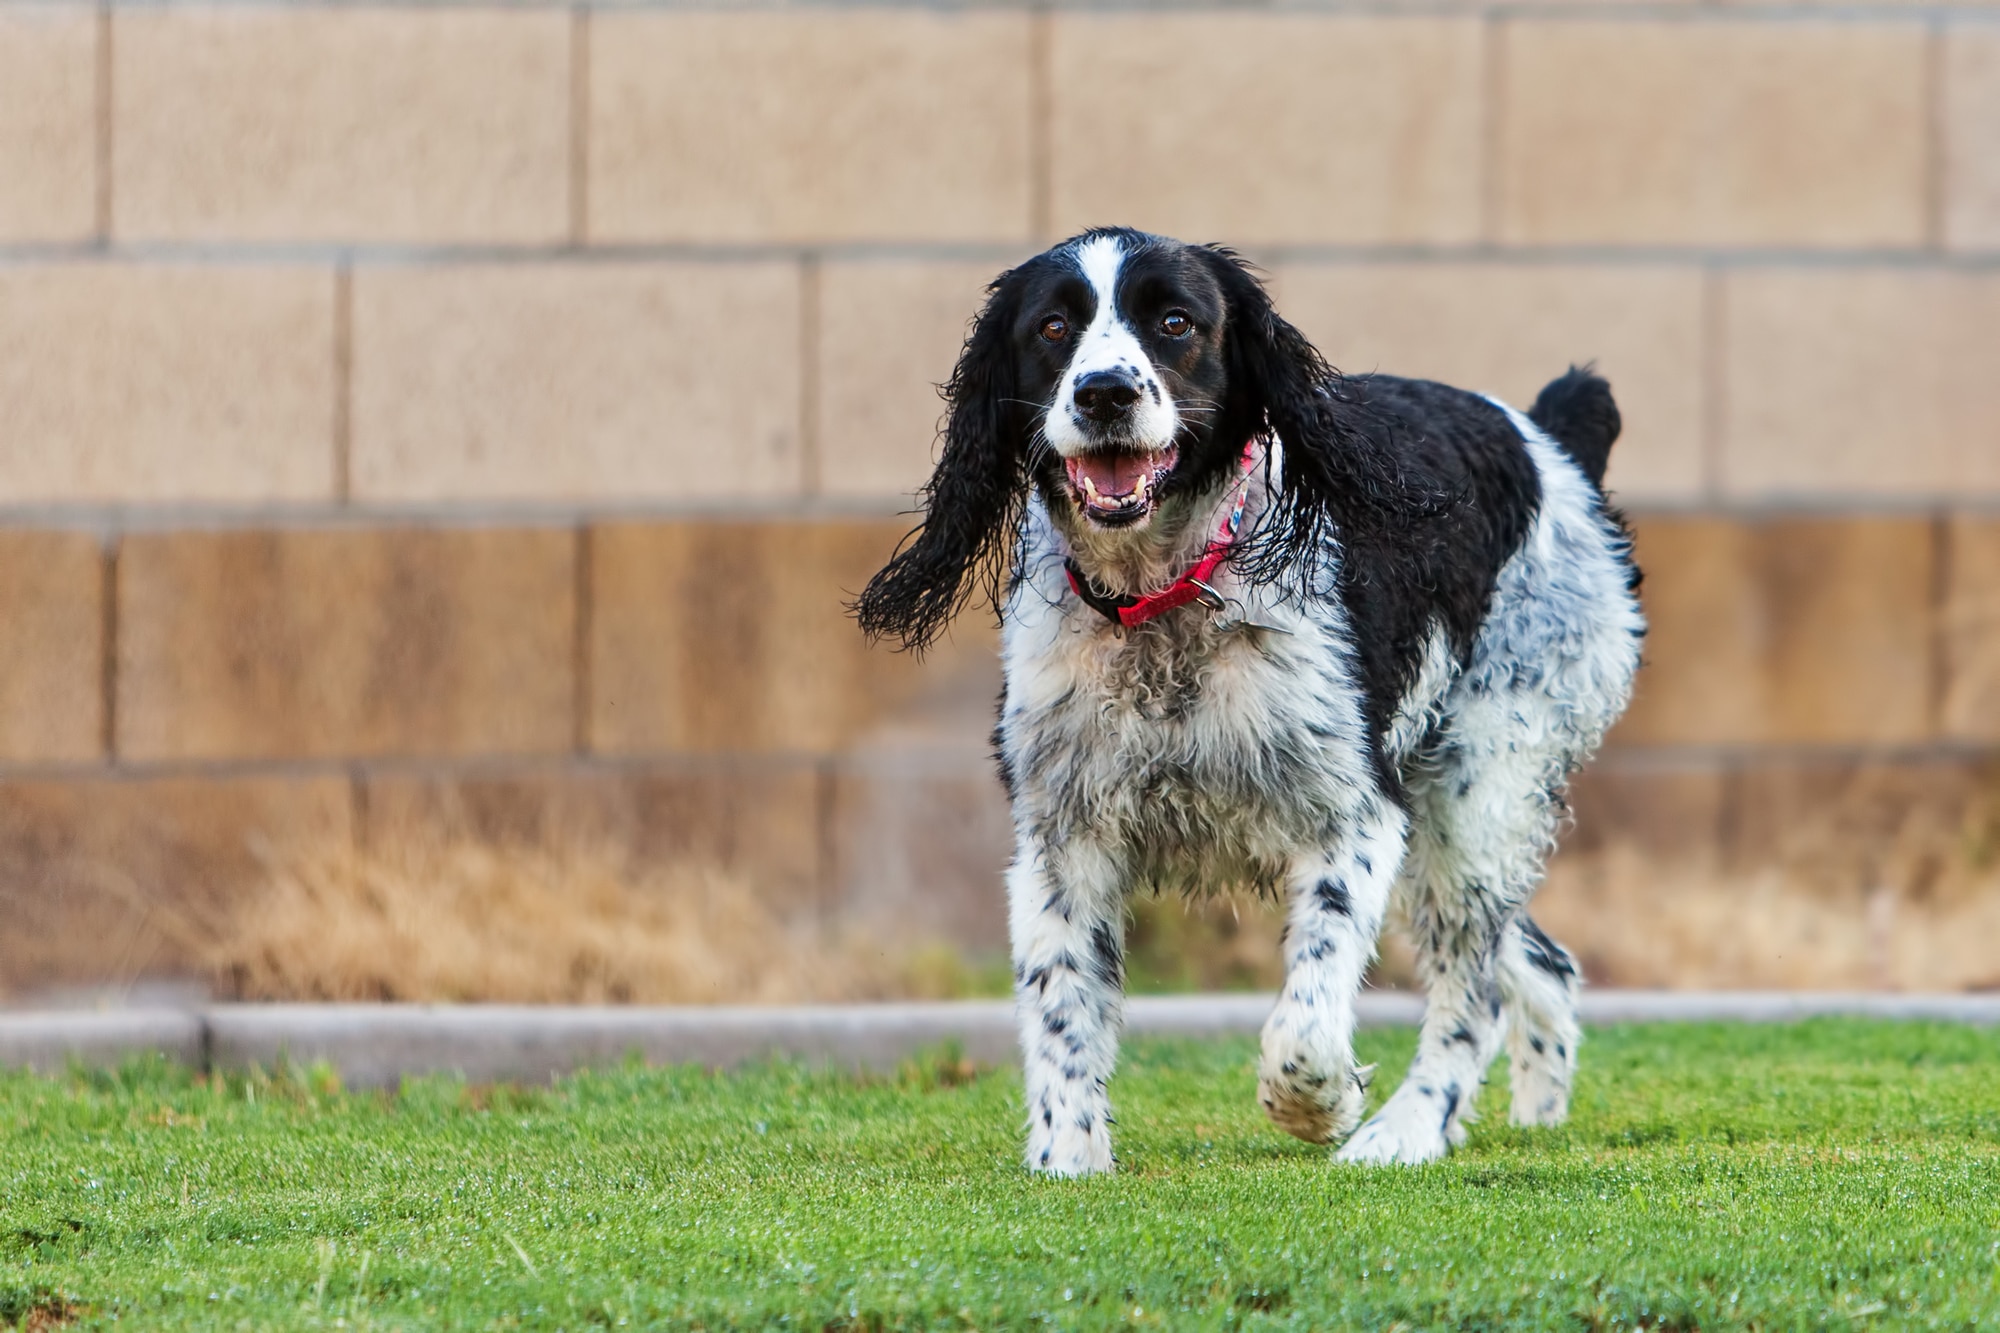 English Springer Spaniel (Facts, Pictures, Videos)